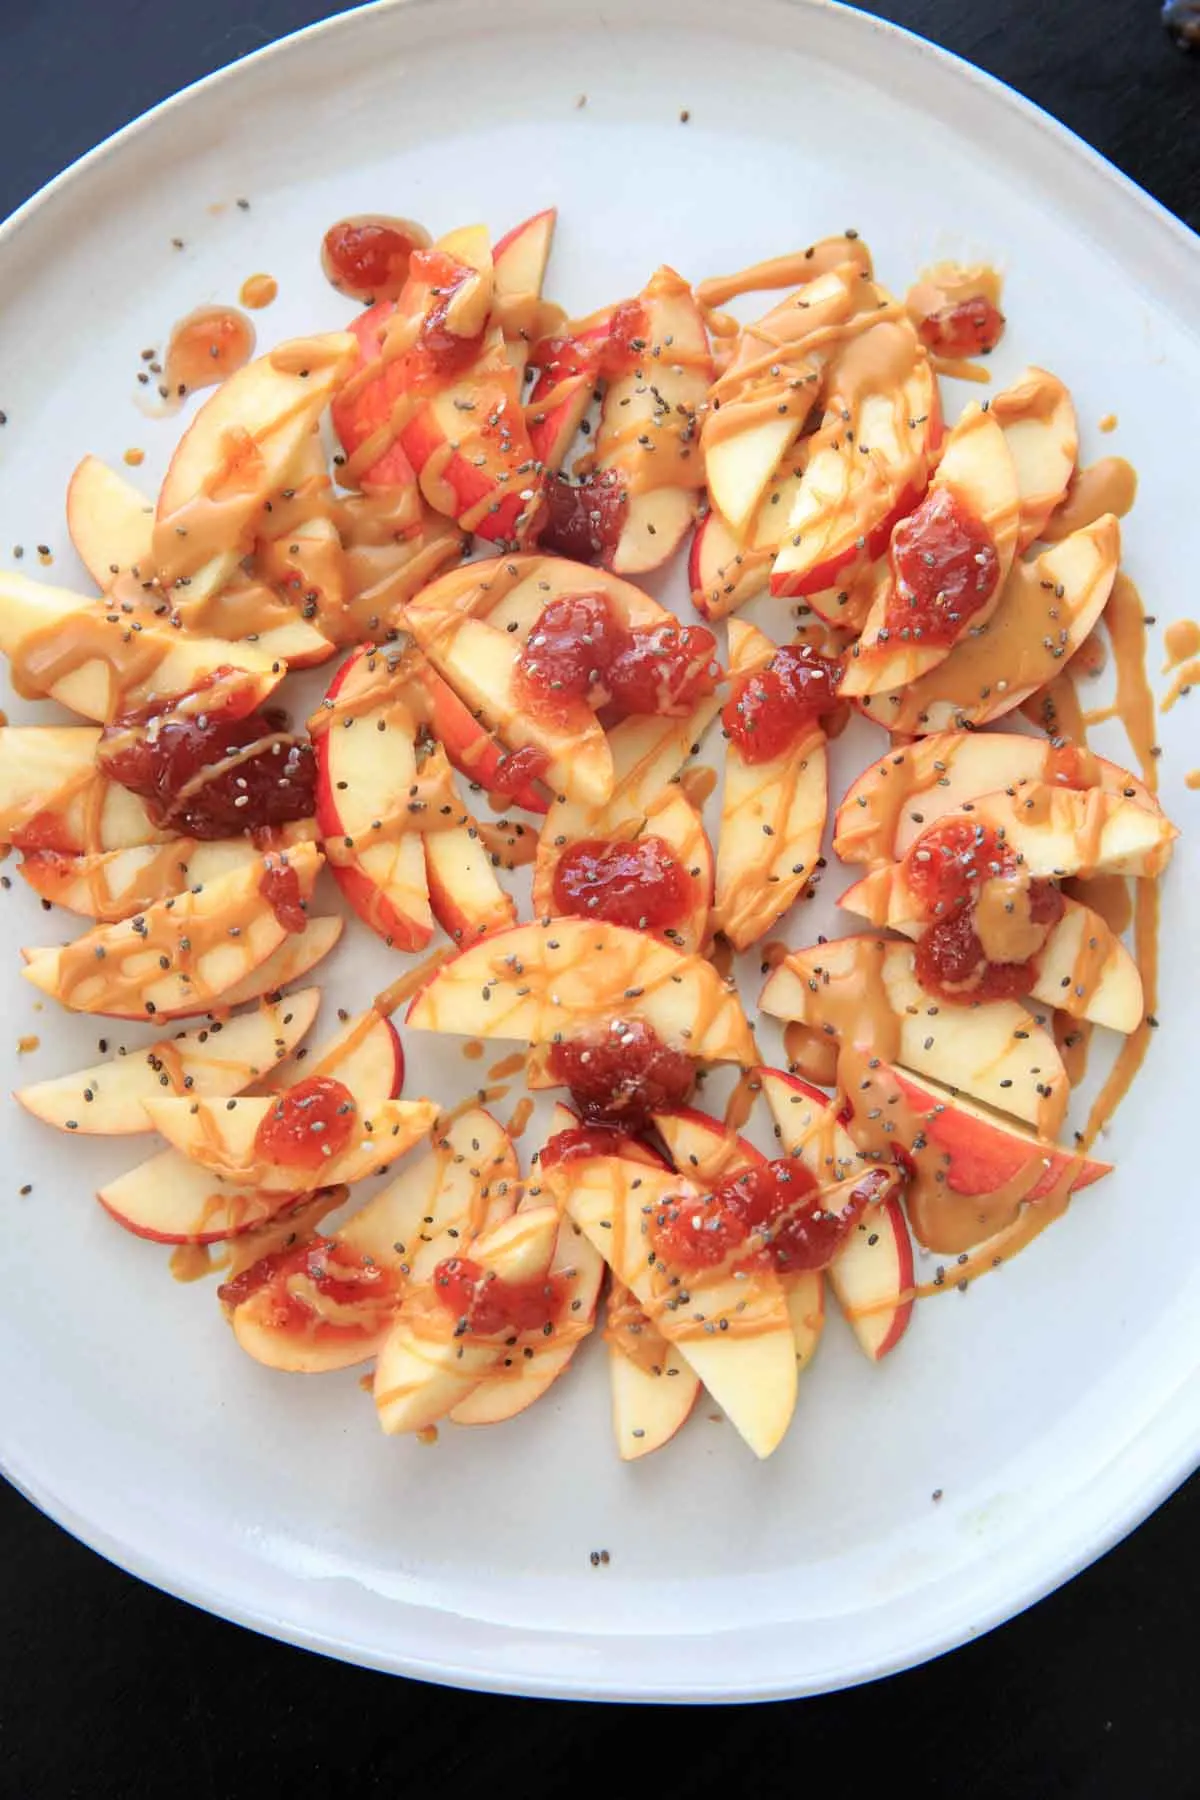 This peanut butter jelly apple nachos recipe is the perfect quick and healthy snack for kids and adults alike! Vegan, gluten-free, protein-packed and delicious.